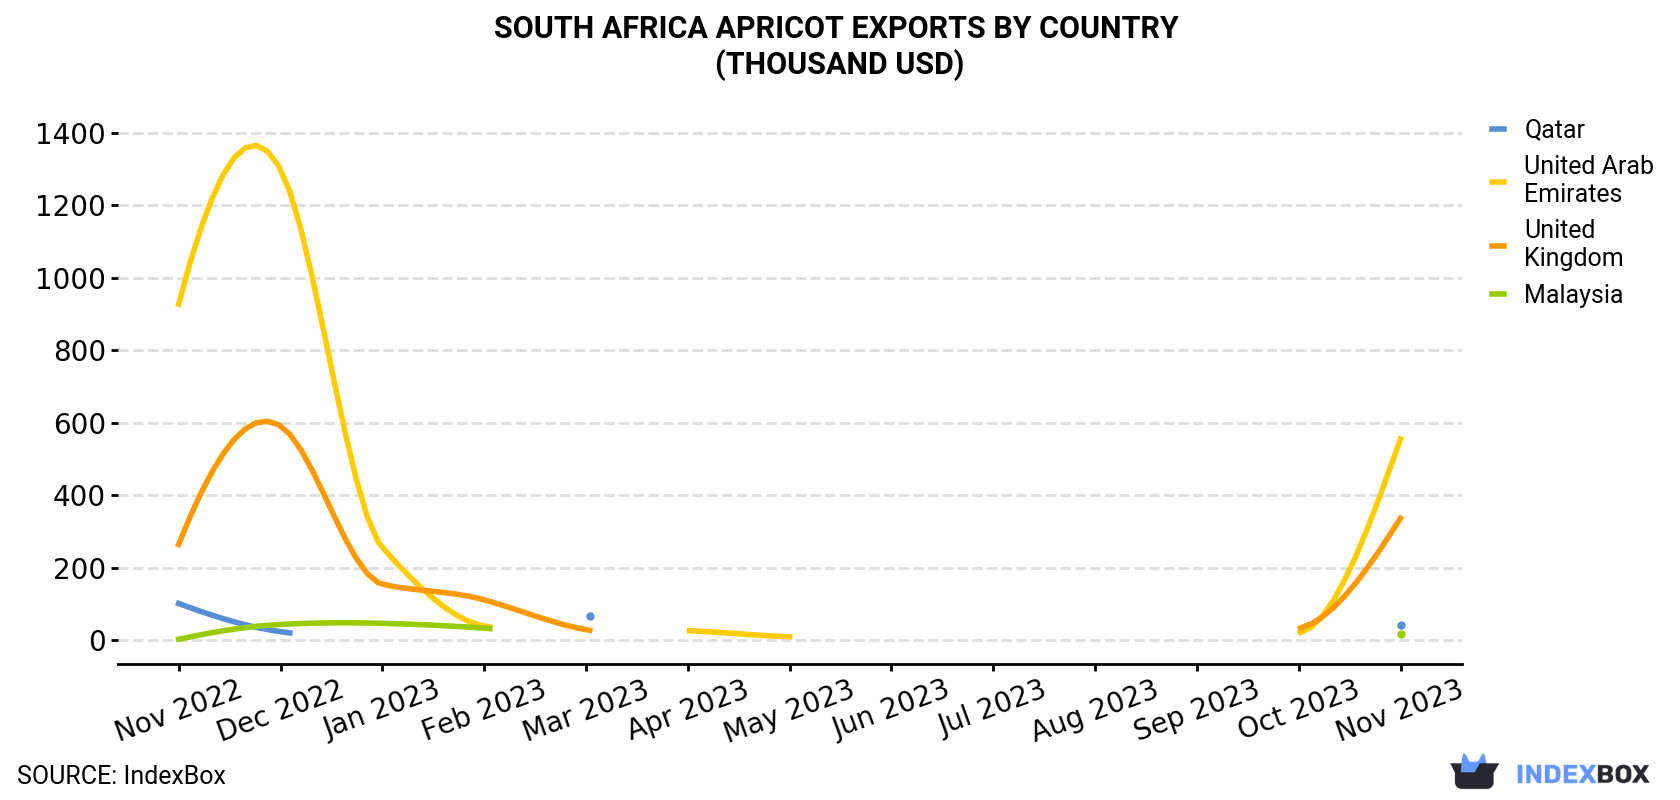 South Africa Apricot Exports By Country (Thousand USD)